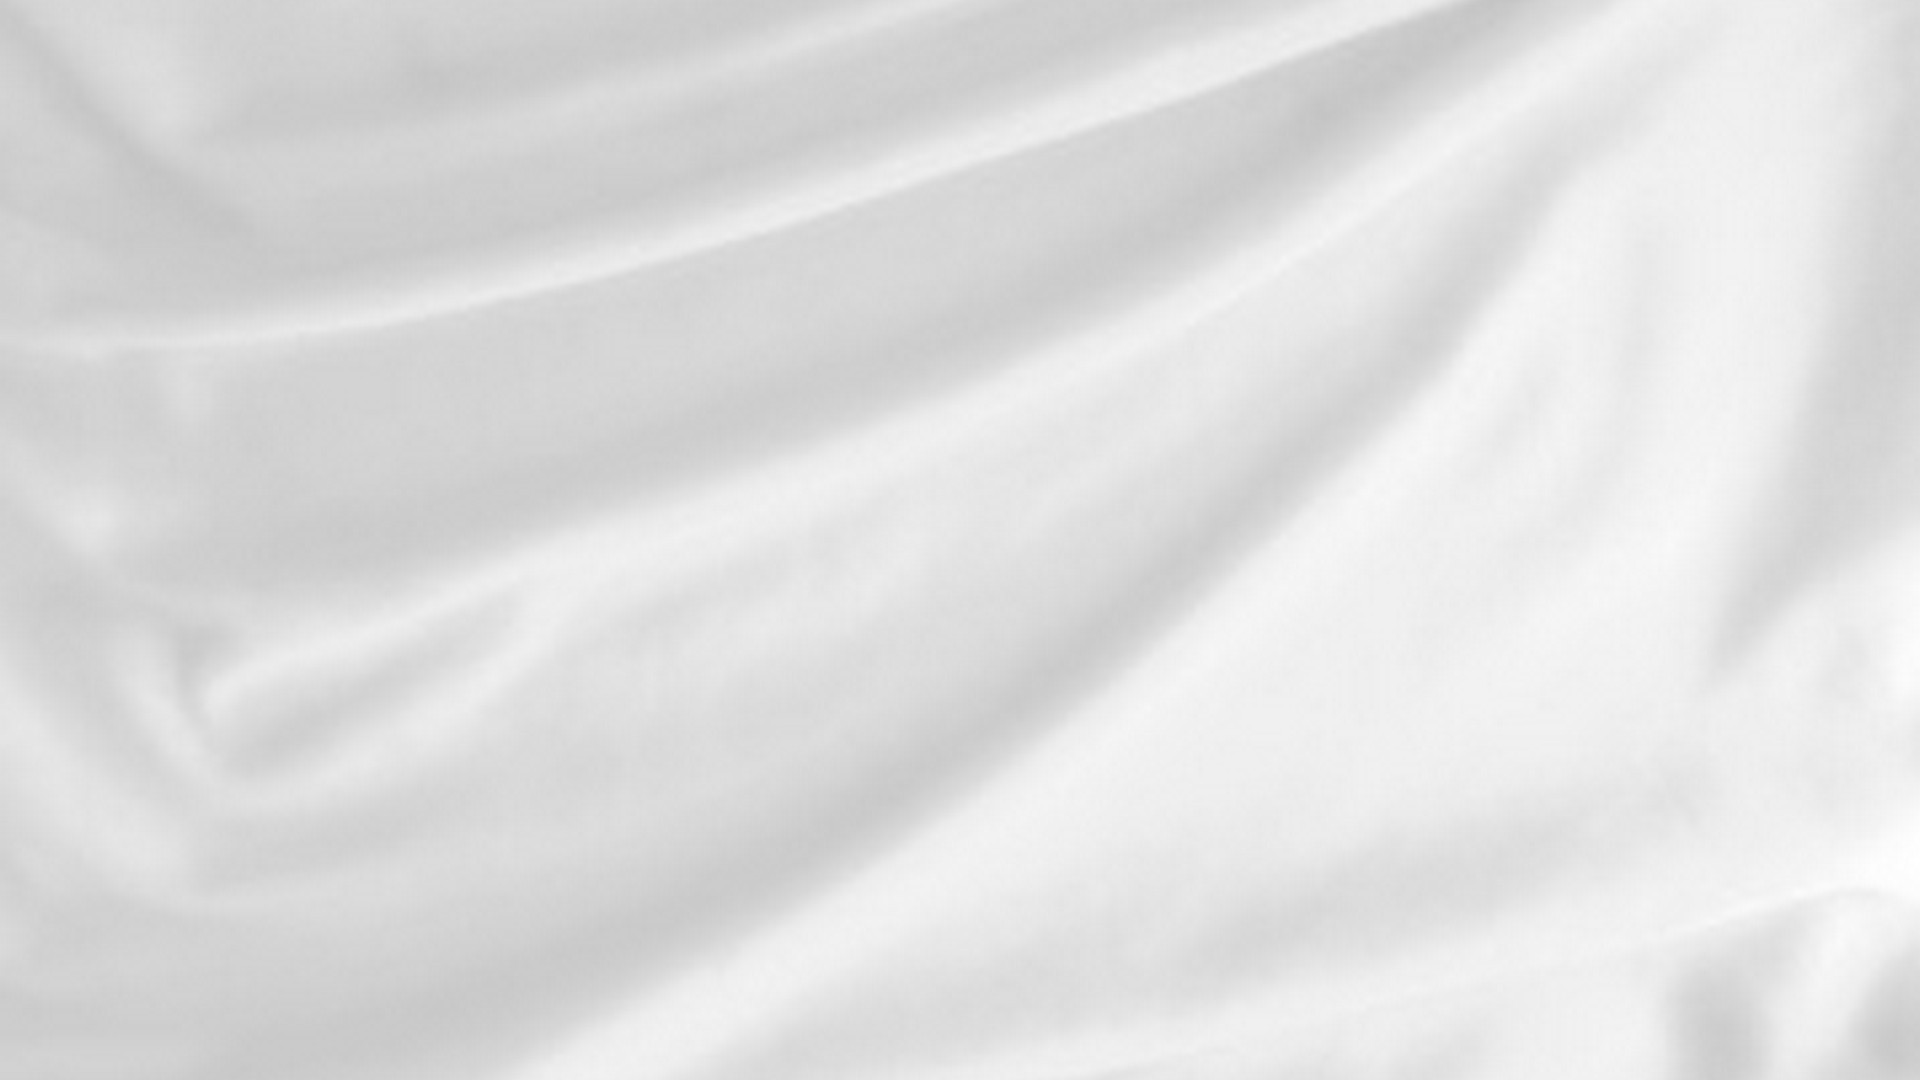 HD White Silk Backgrounds With high-resolution 1920X1080 pixel. You can use this wallpaper for your Windows and Mac OS computers as well as your Android and iPhone smartphones